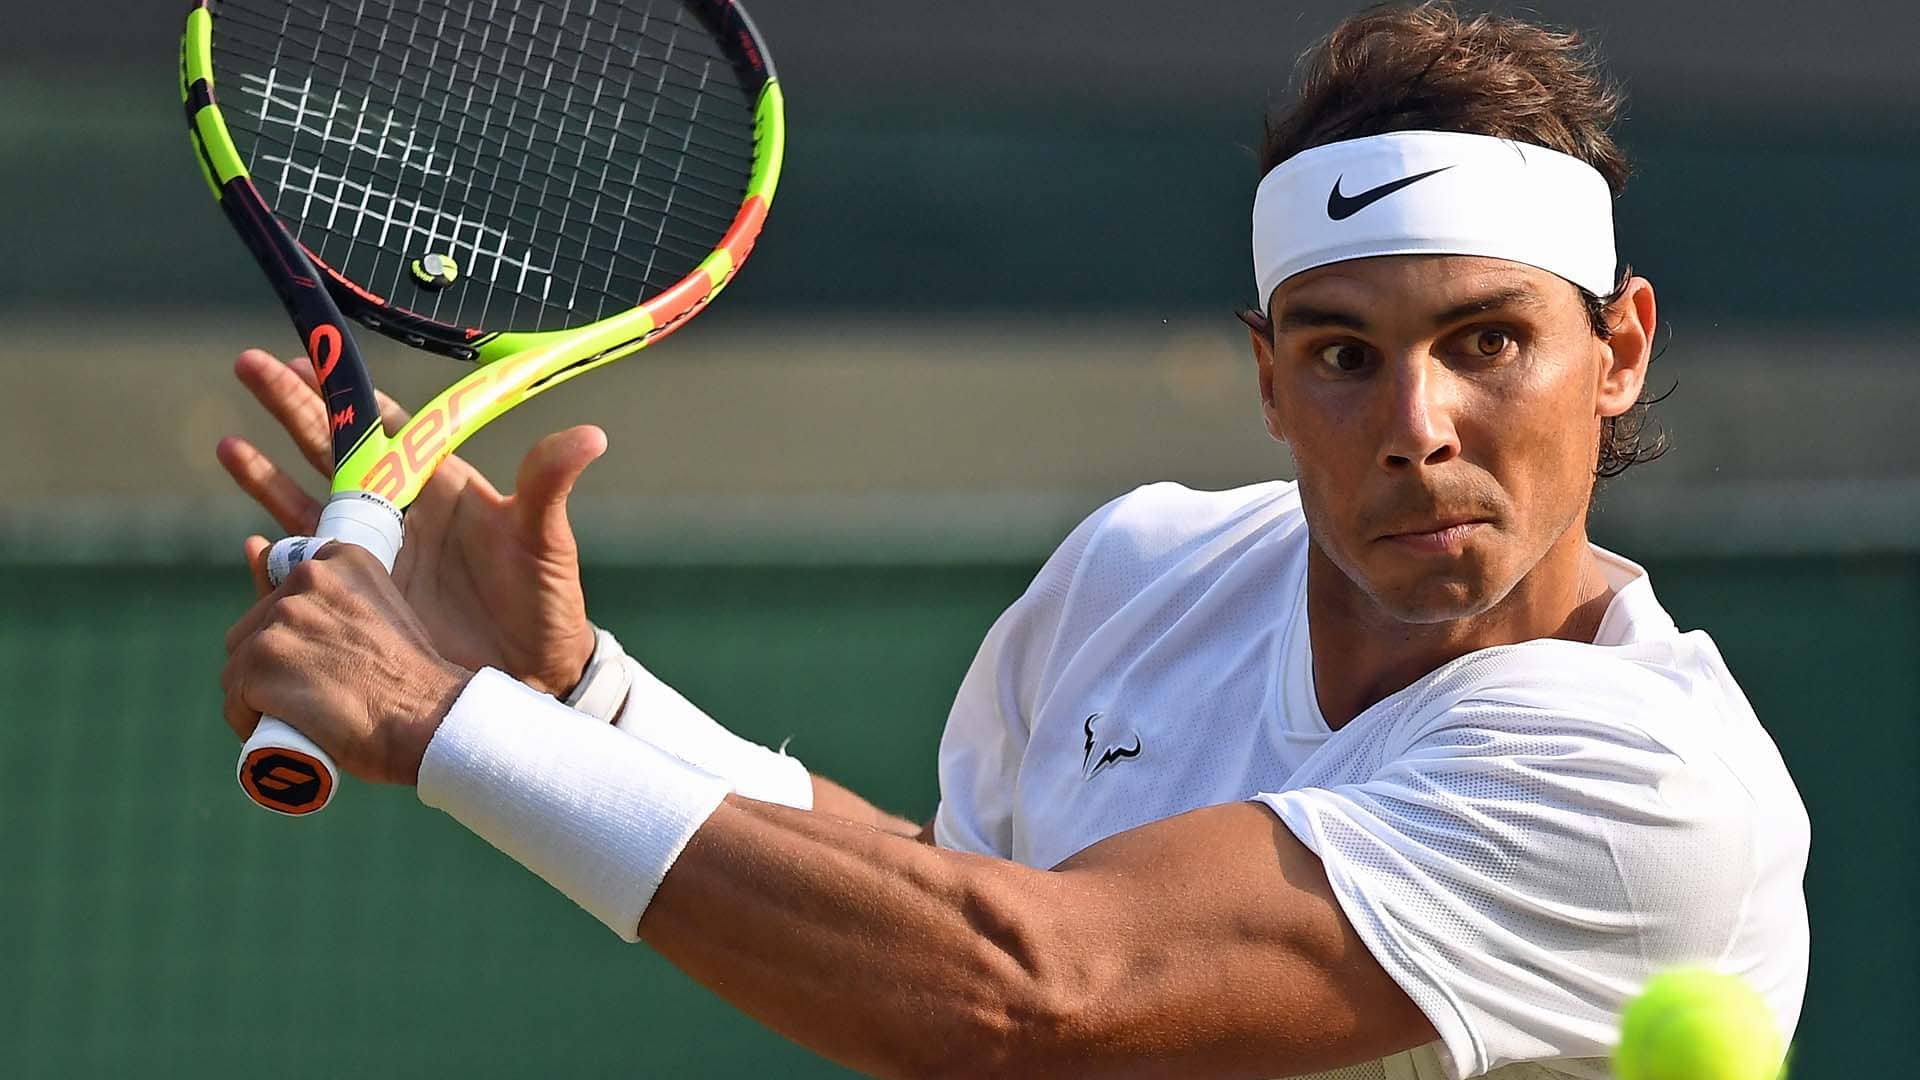 Latest Tennis News: Rafael Nadal is ready to make another comeback | SportzPoint.com